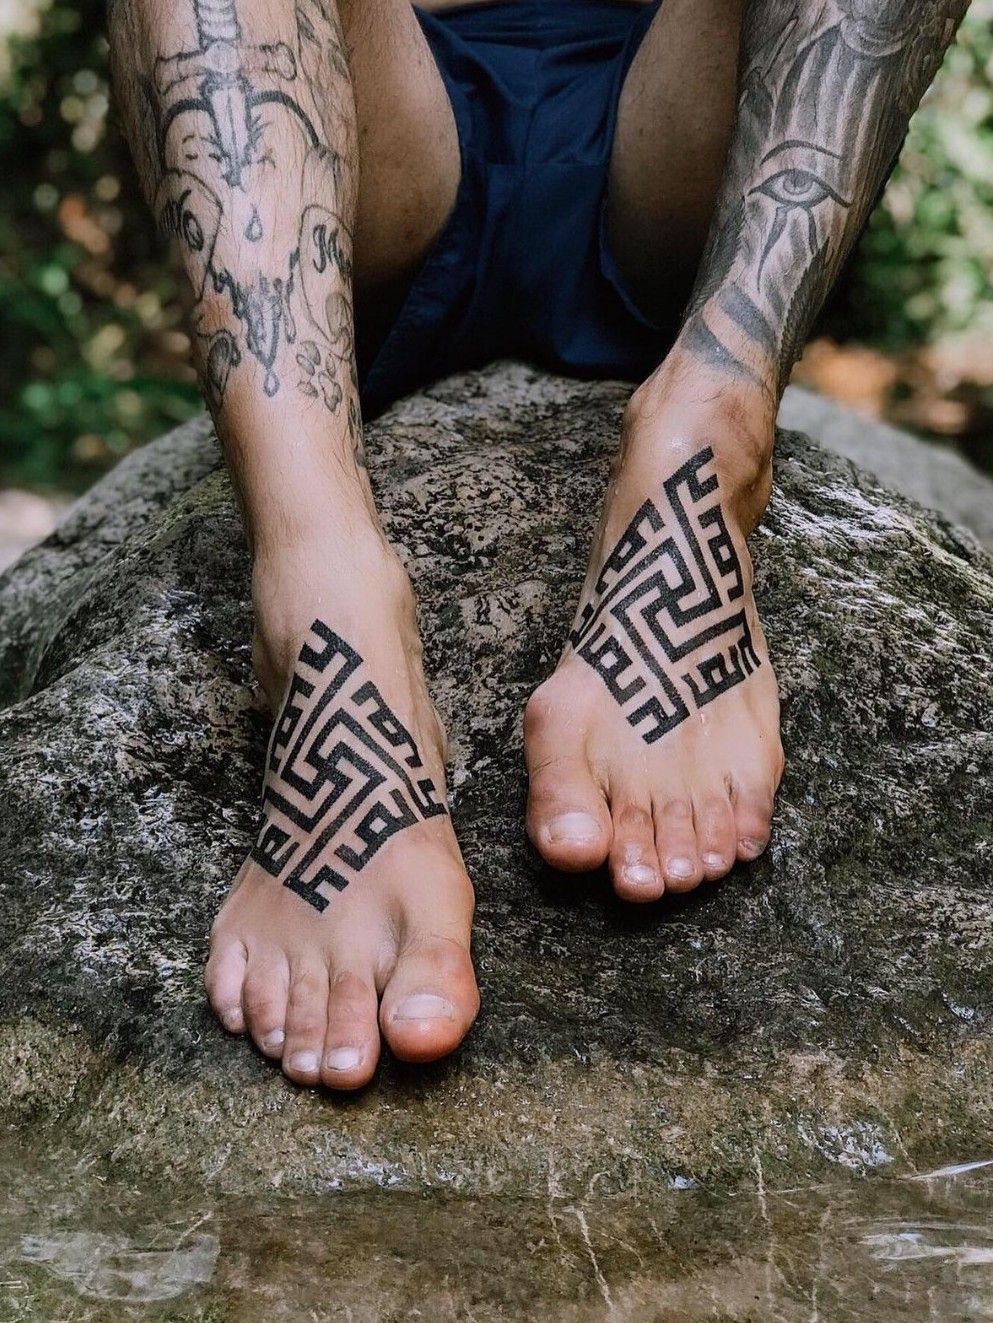 Heres the Reason People Get Swastika Tattoos That No One Is Talking About